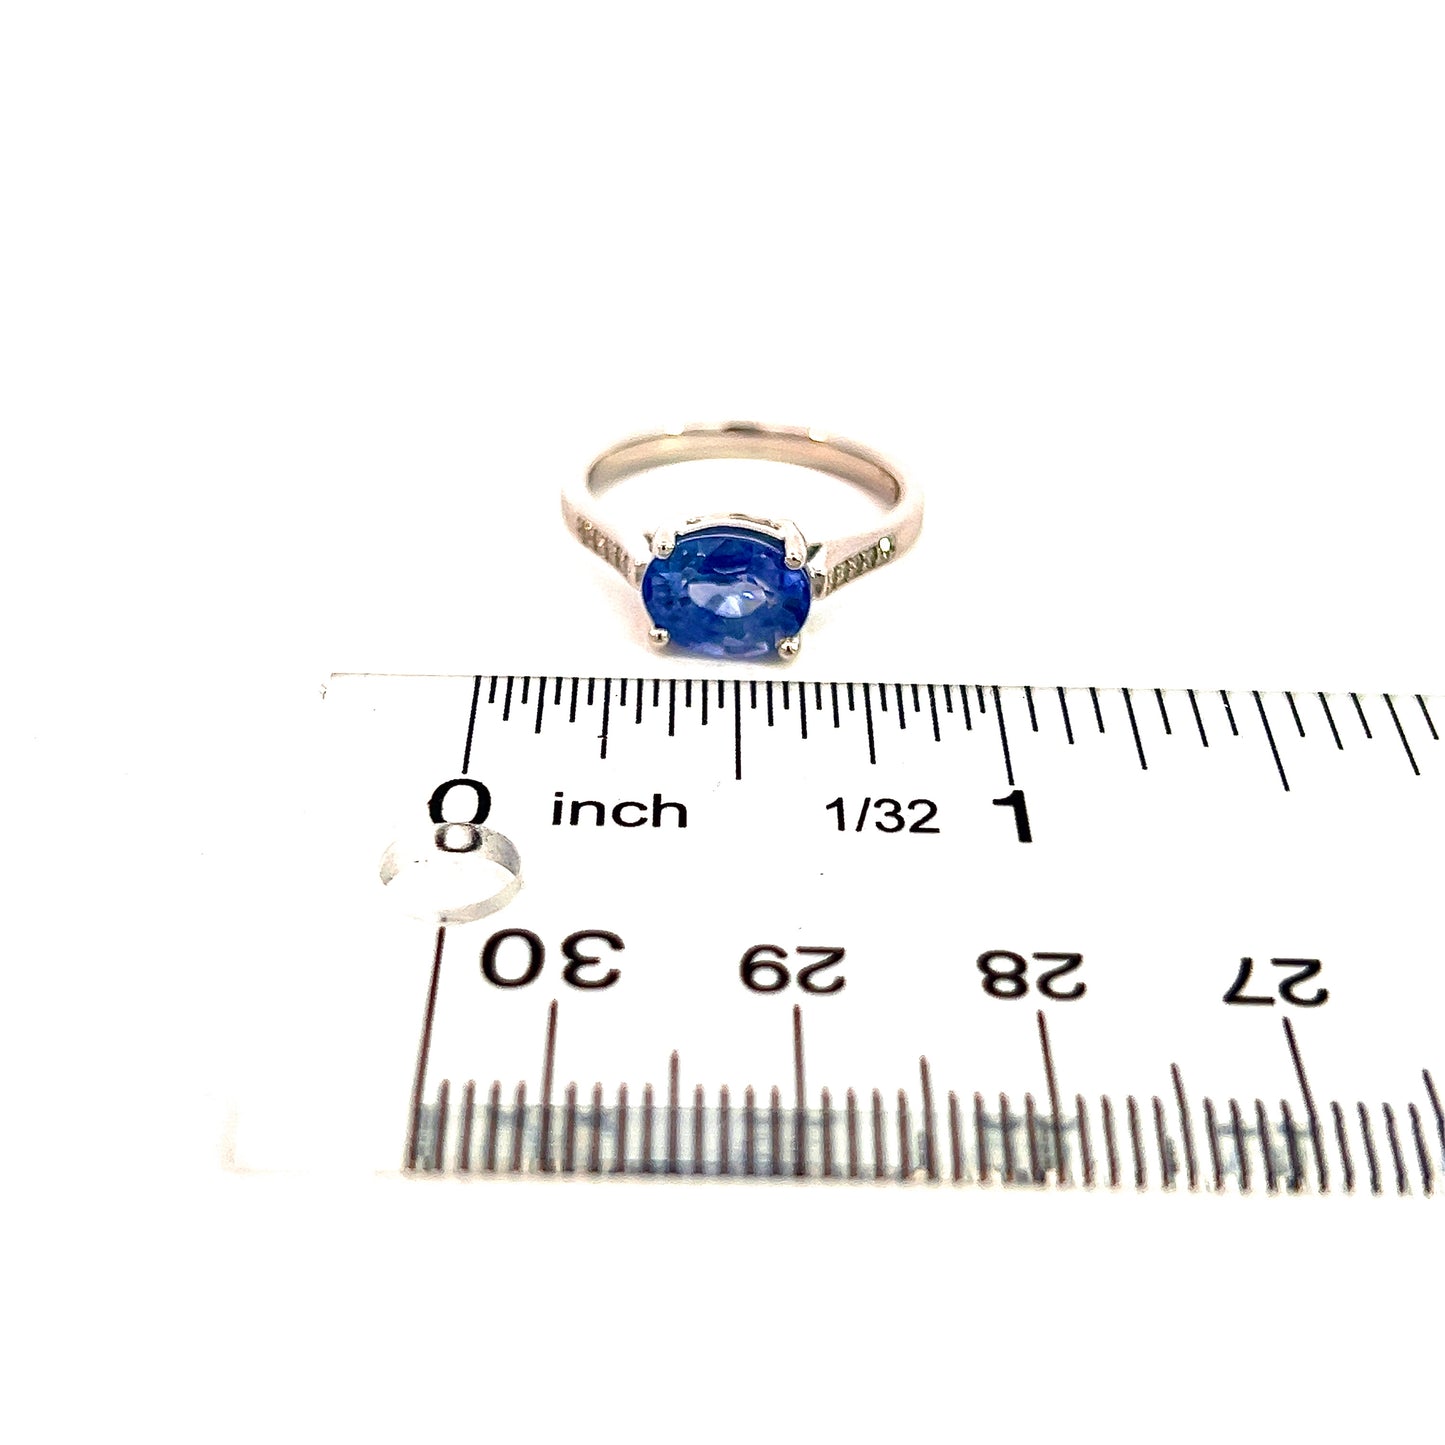 Natural Sapphire Diamond Ring 6.5 14k White Gold 2.36 TCW Certified $3,950 310592